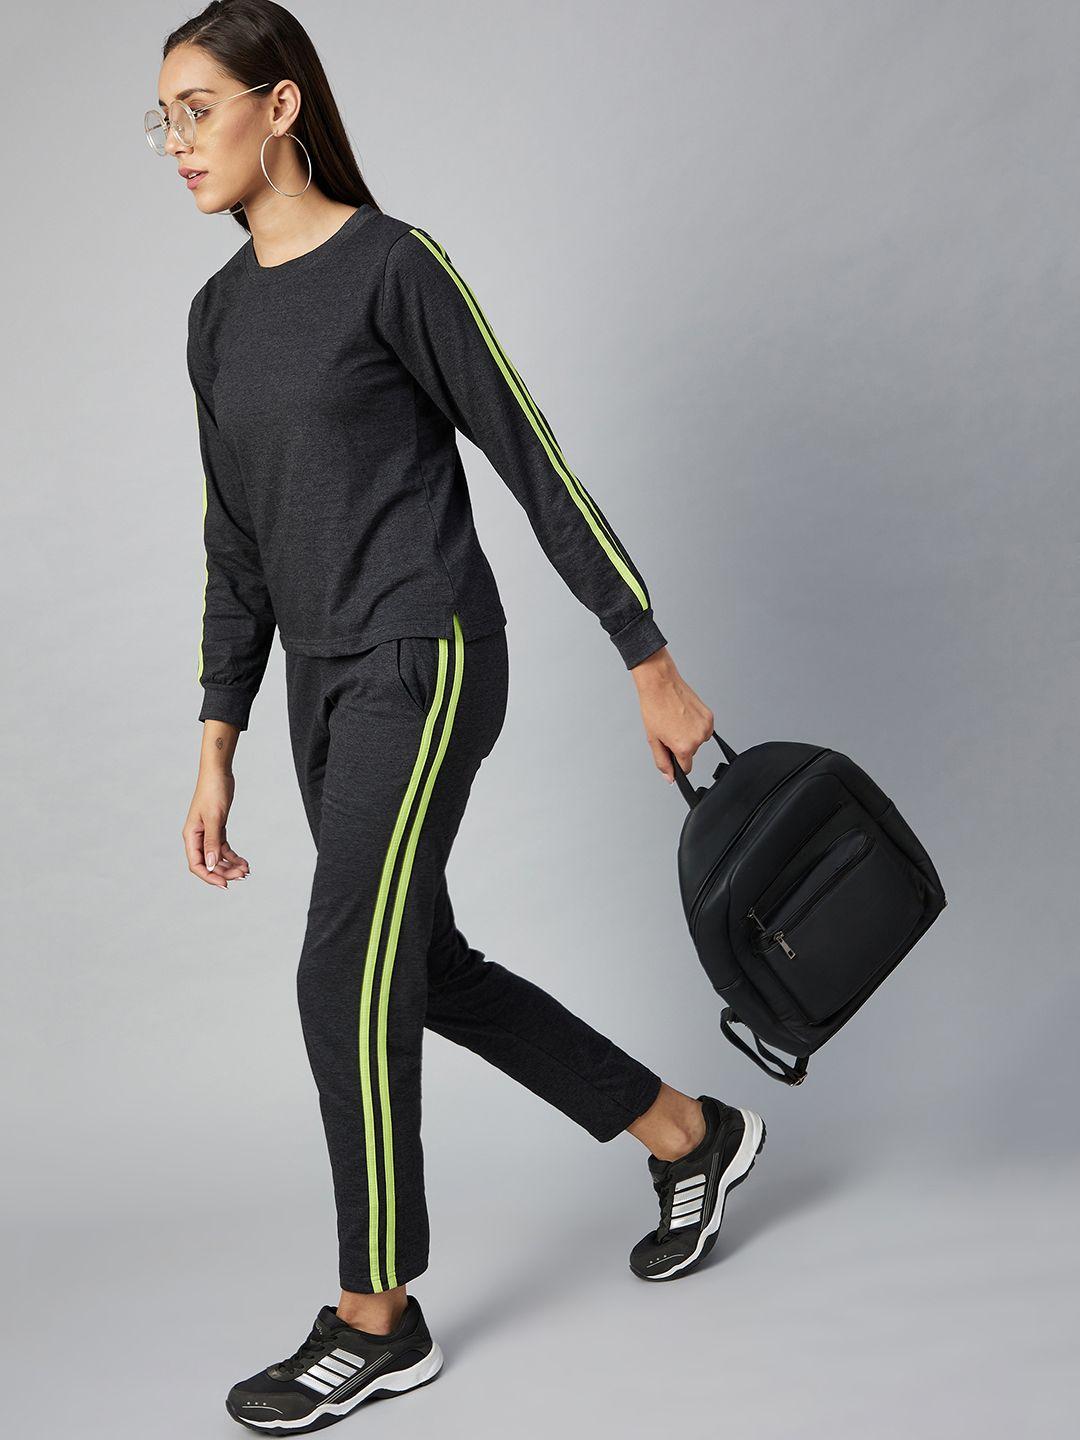 stylestone women cotton charcoal solid with lime green side taping tracksuit